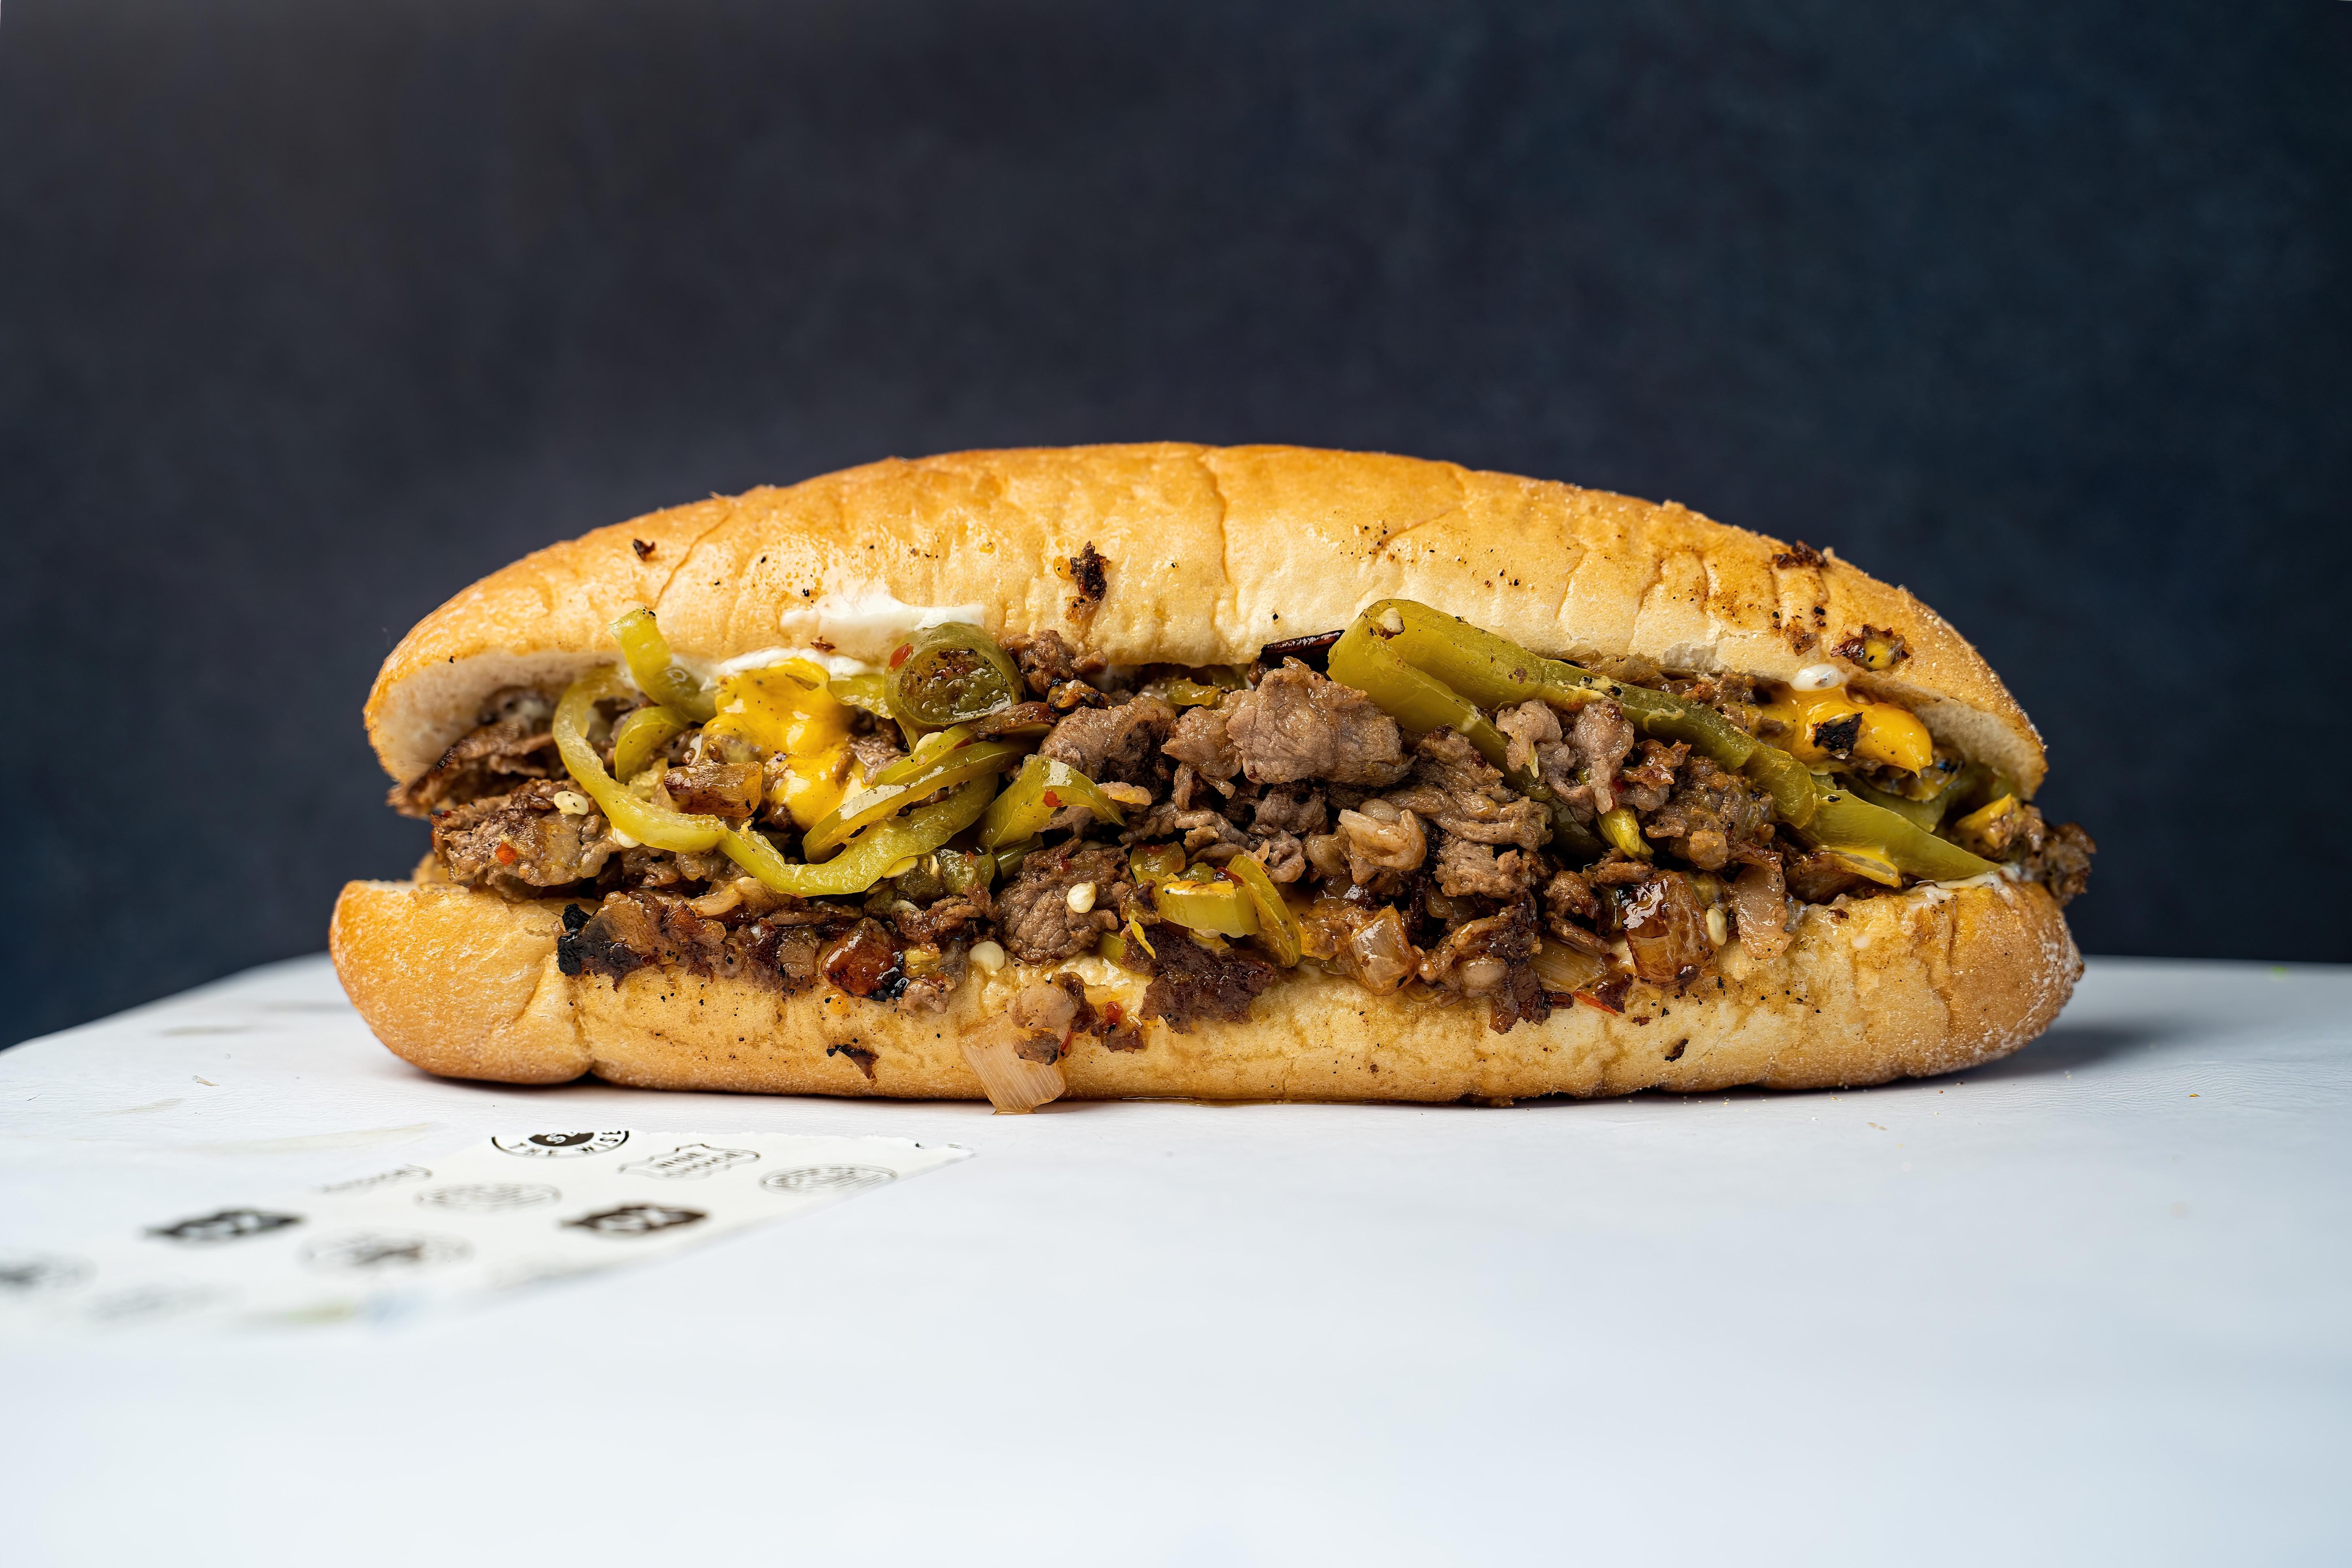 Philly Cheese Steak